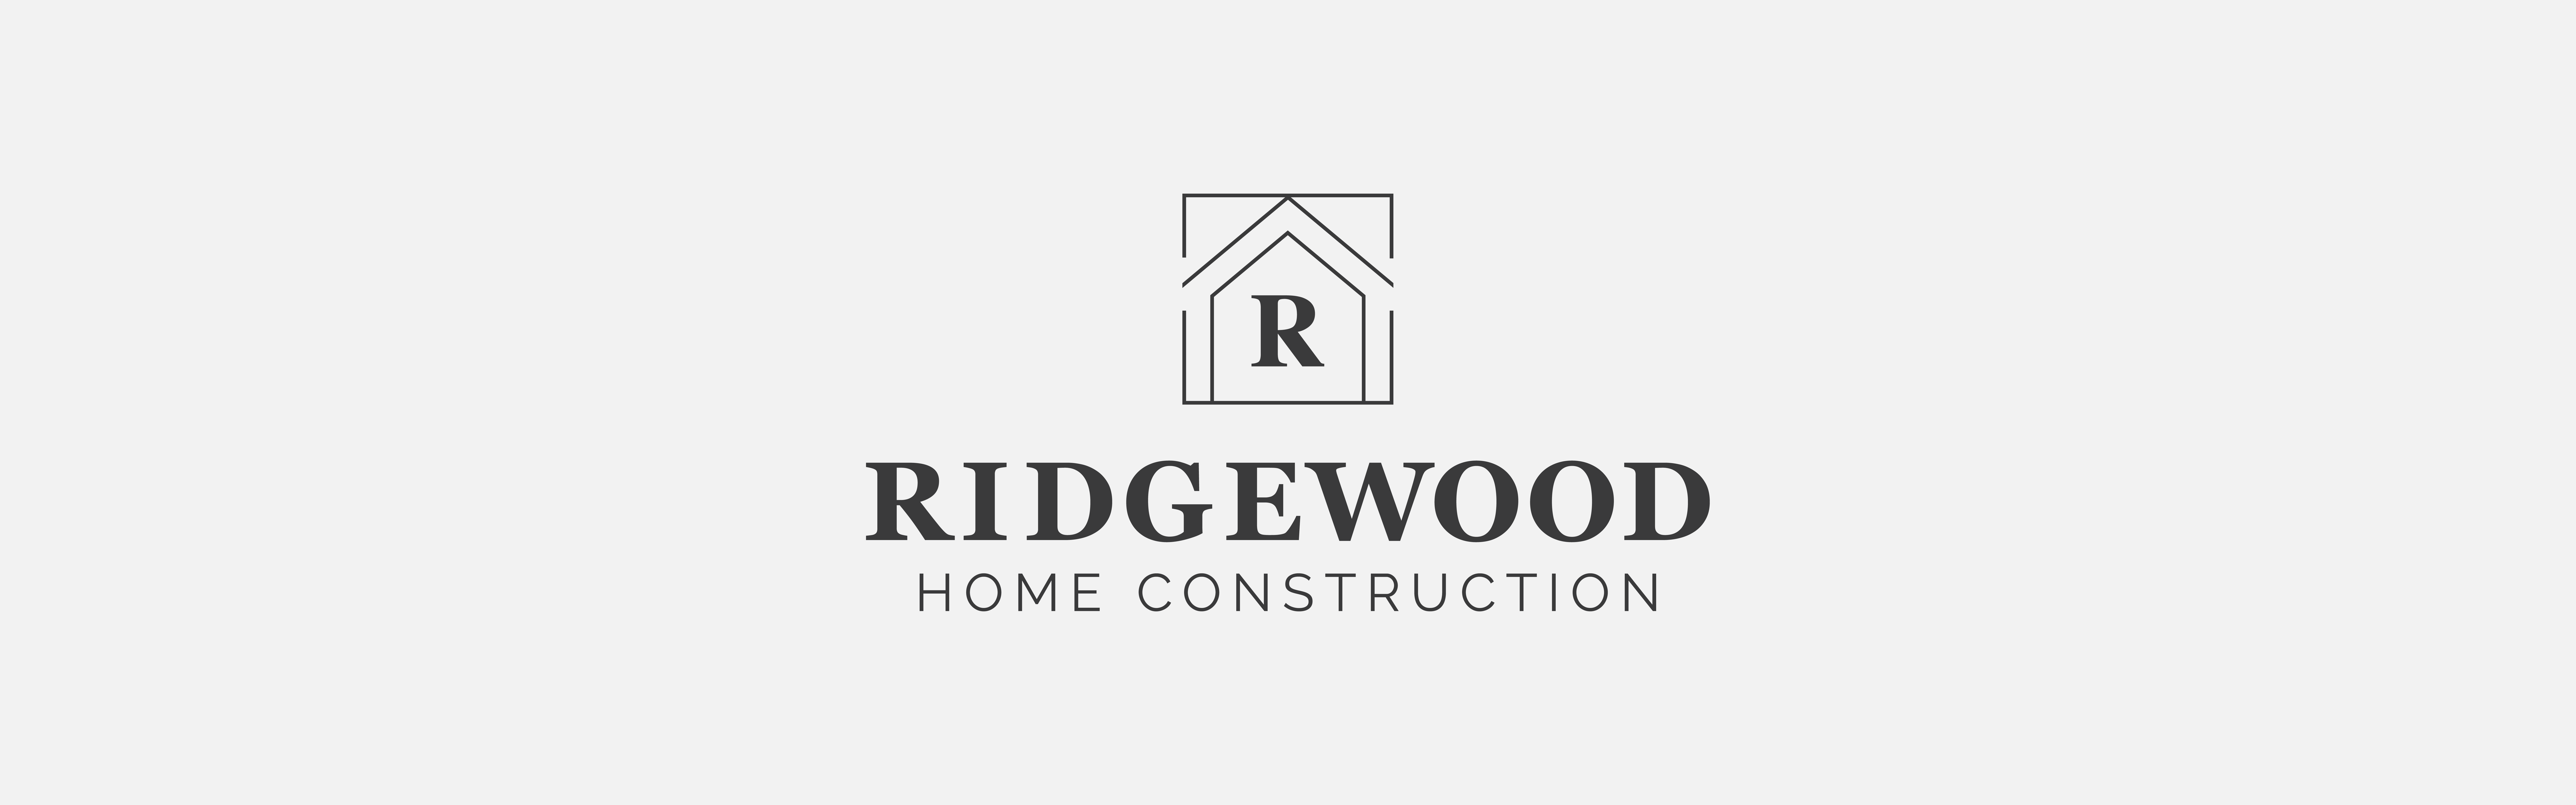 Logo of Ridgewood Home Construction featuring an icon of a house with the letter 'R' inside above the company name.